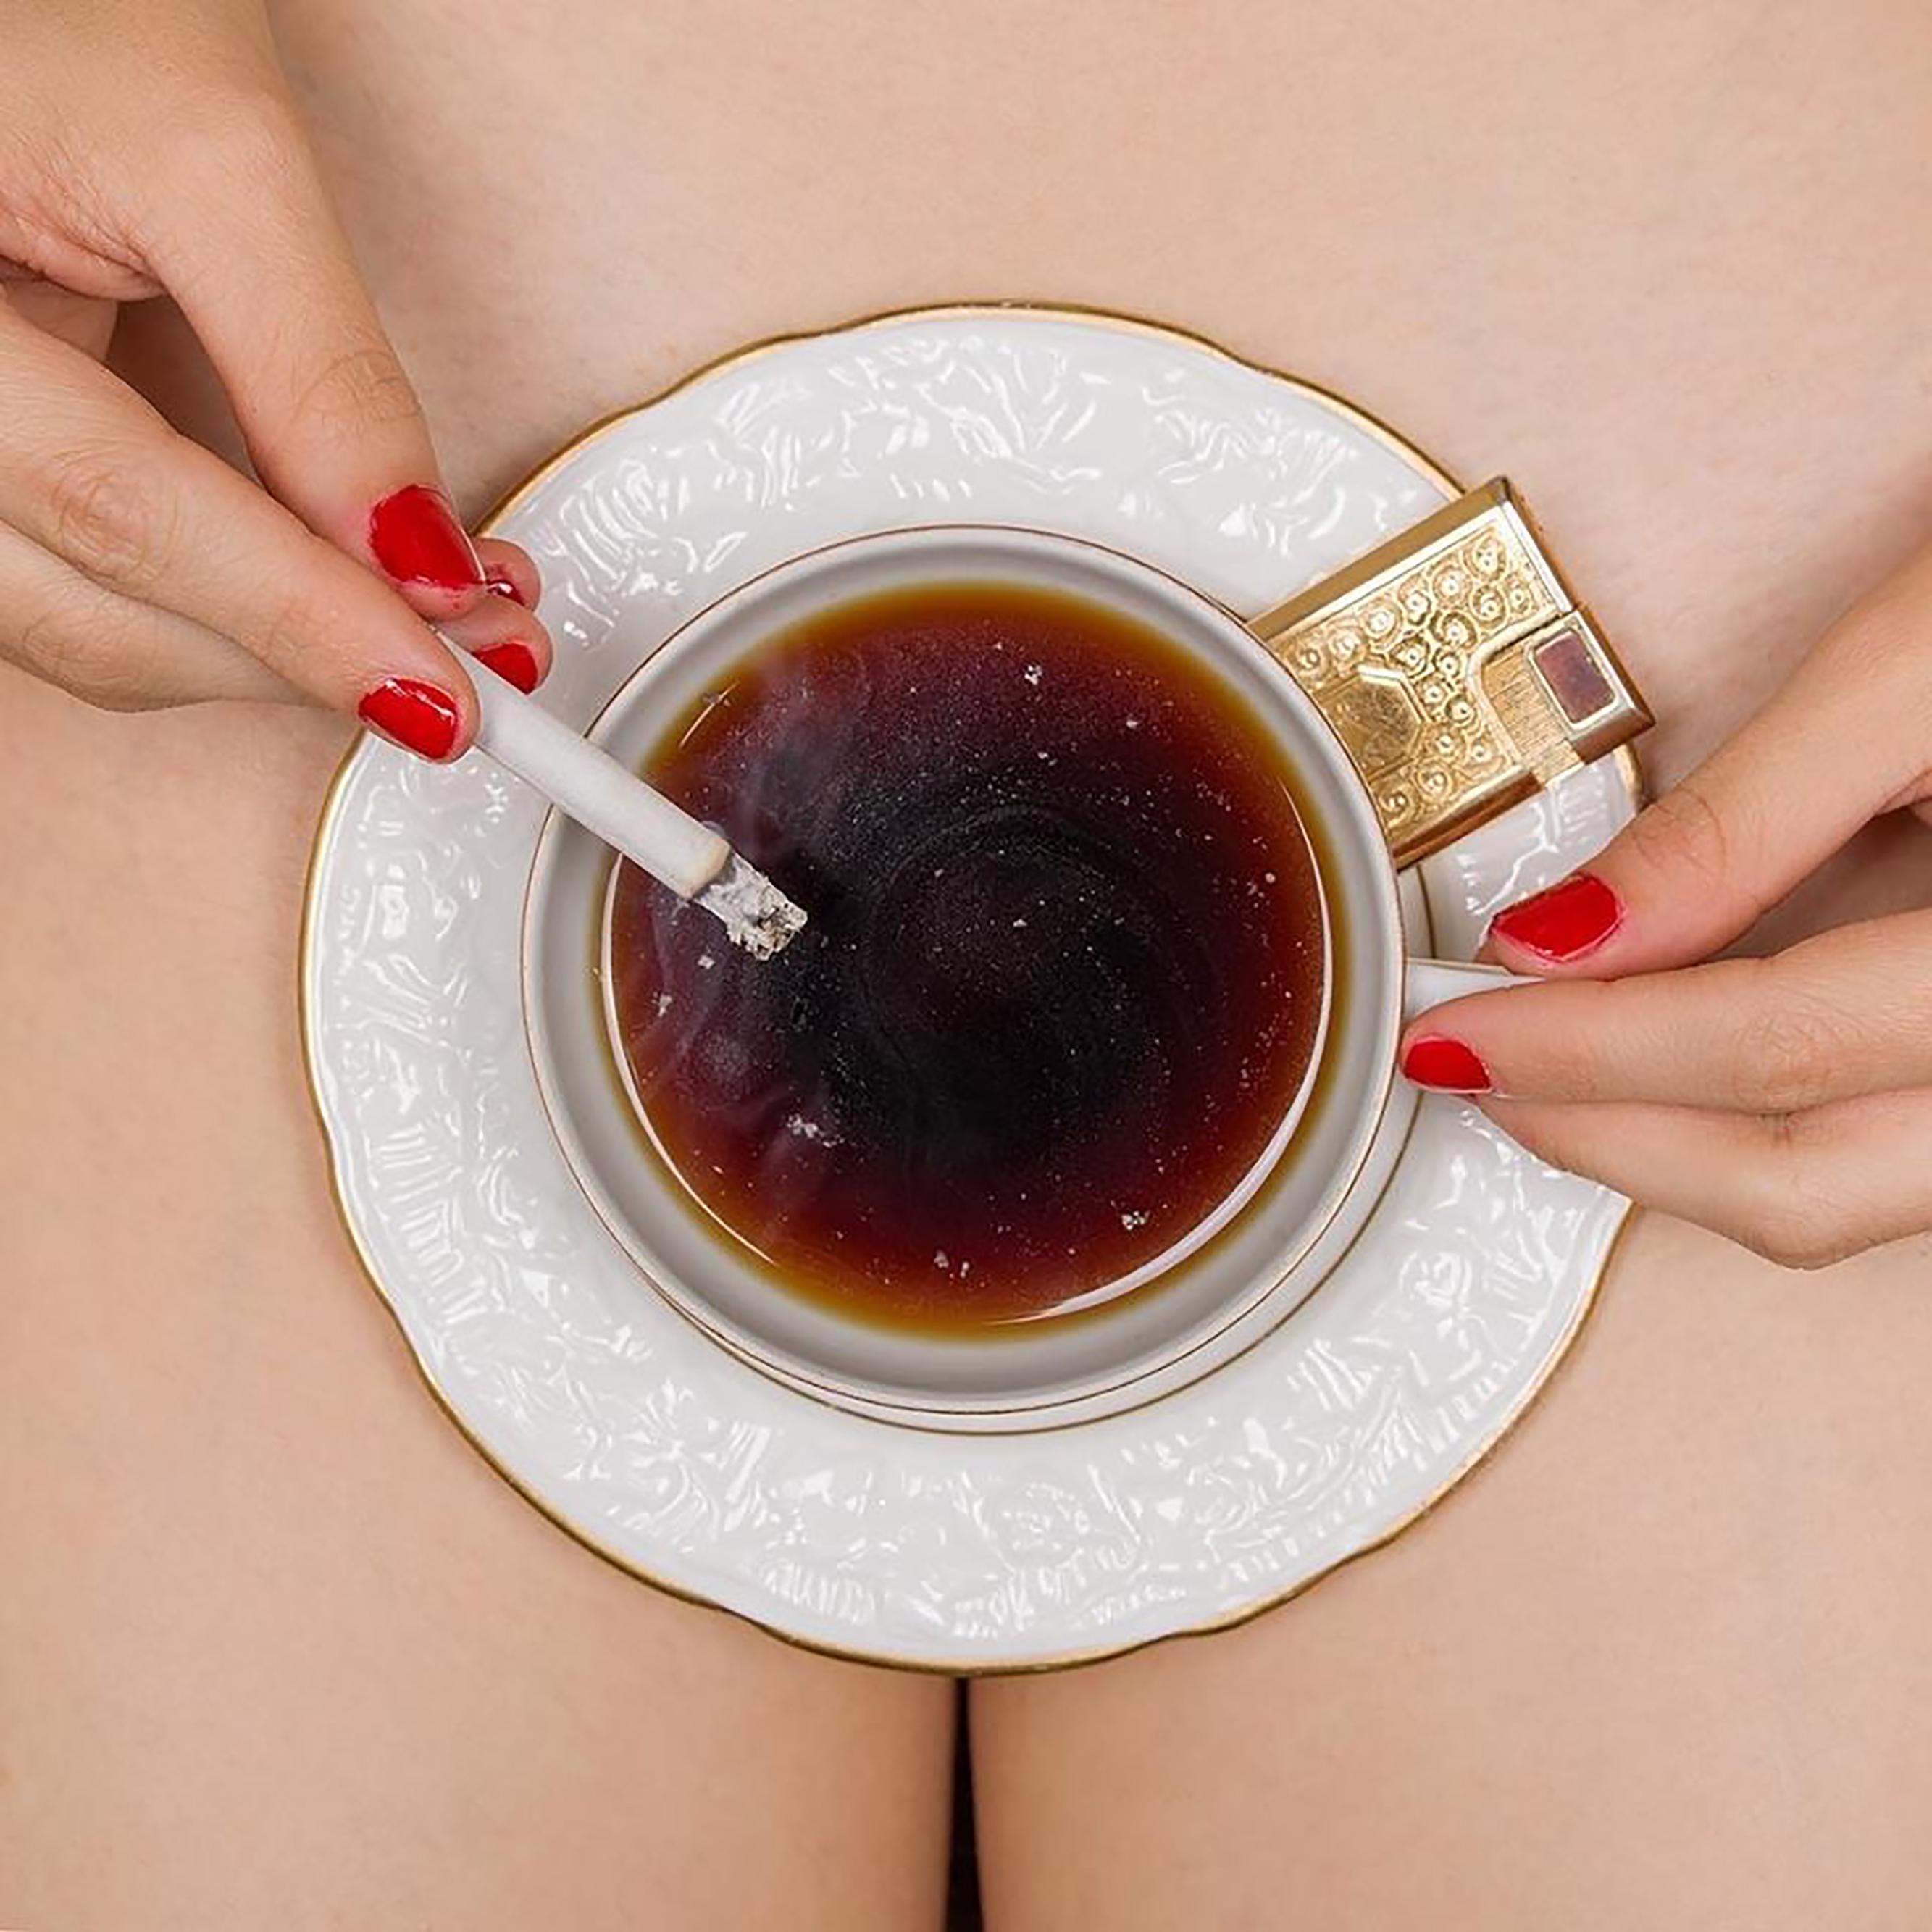 Tyler Shields, 'Coffee and Cigarettes', 2018
Medium: C-type Photographic Print
18 x 18 "
Signature: Signed Certificate of Authenticity
Edition of 3 plus 2 AP's
Other sizes available
Contemporary Art Photography

Art Info calls Tyler Shields